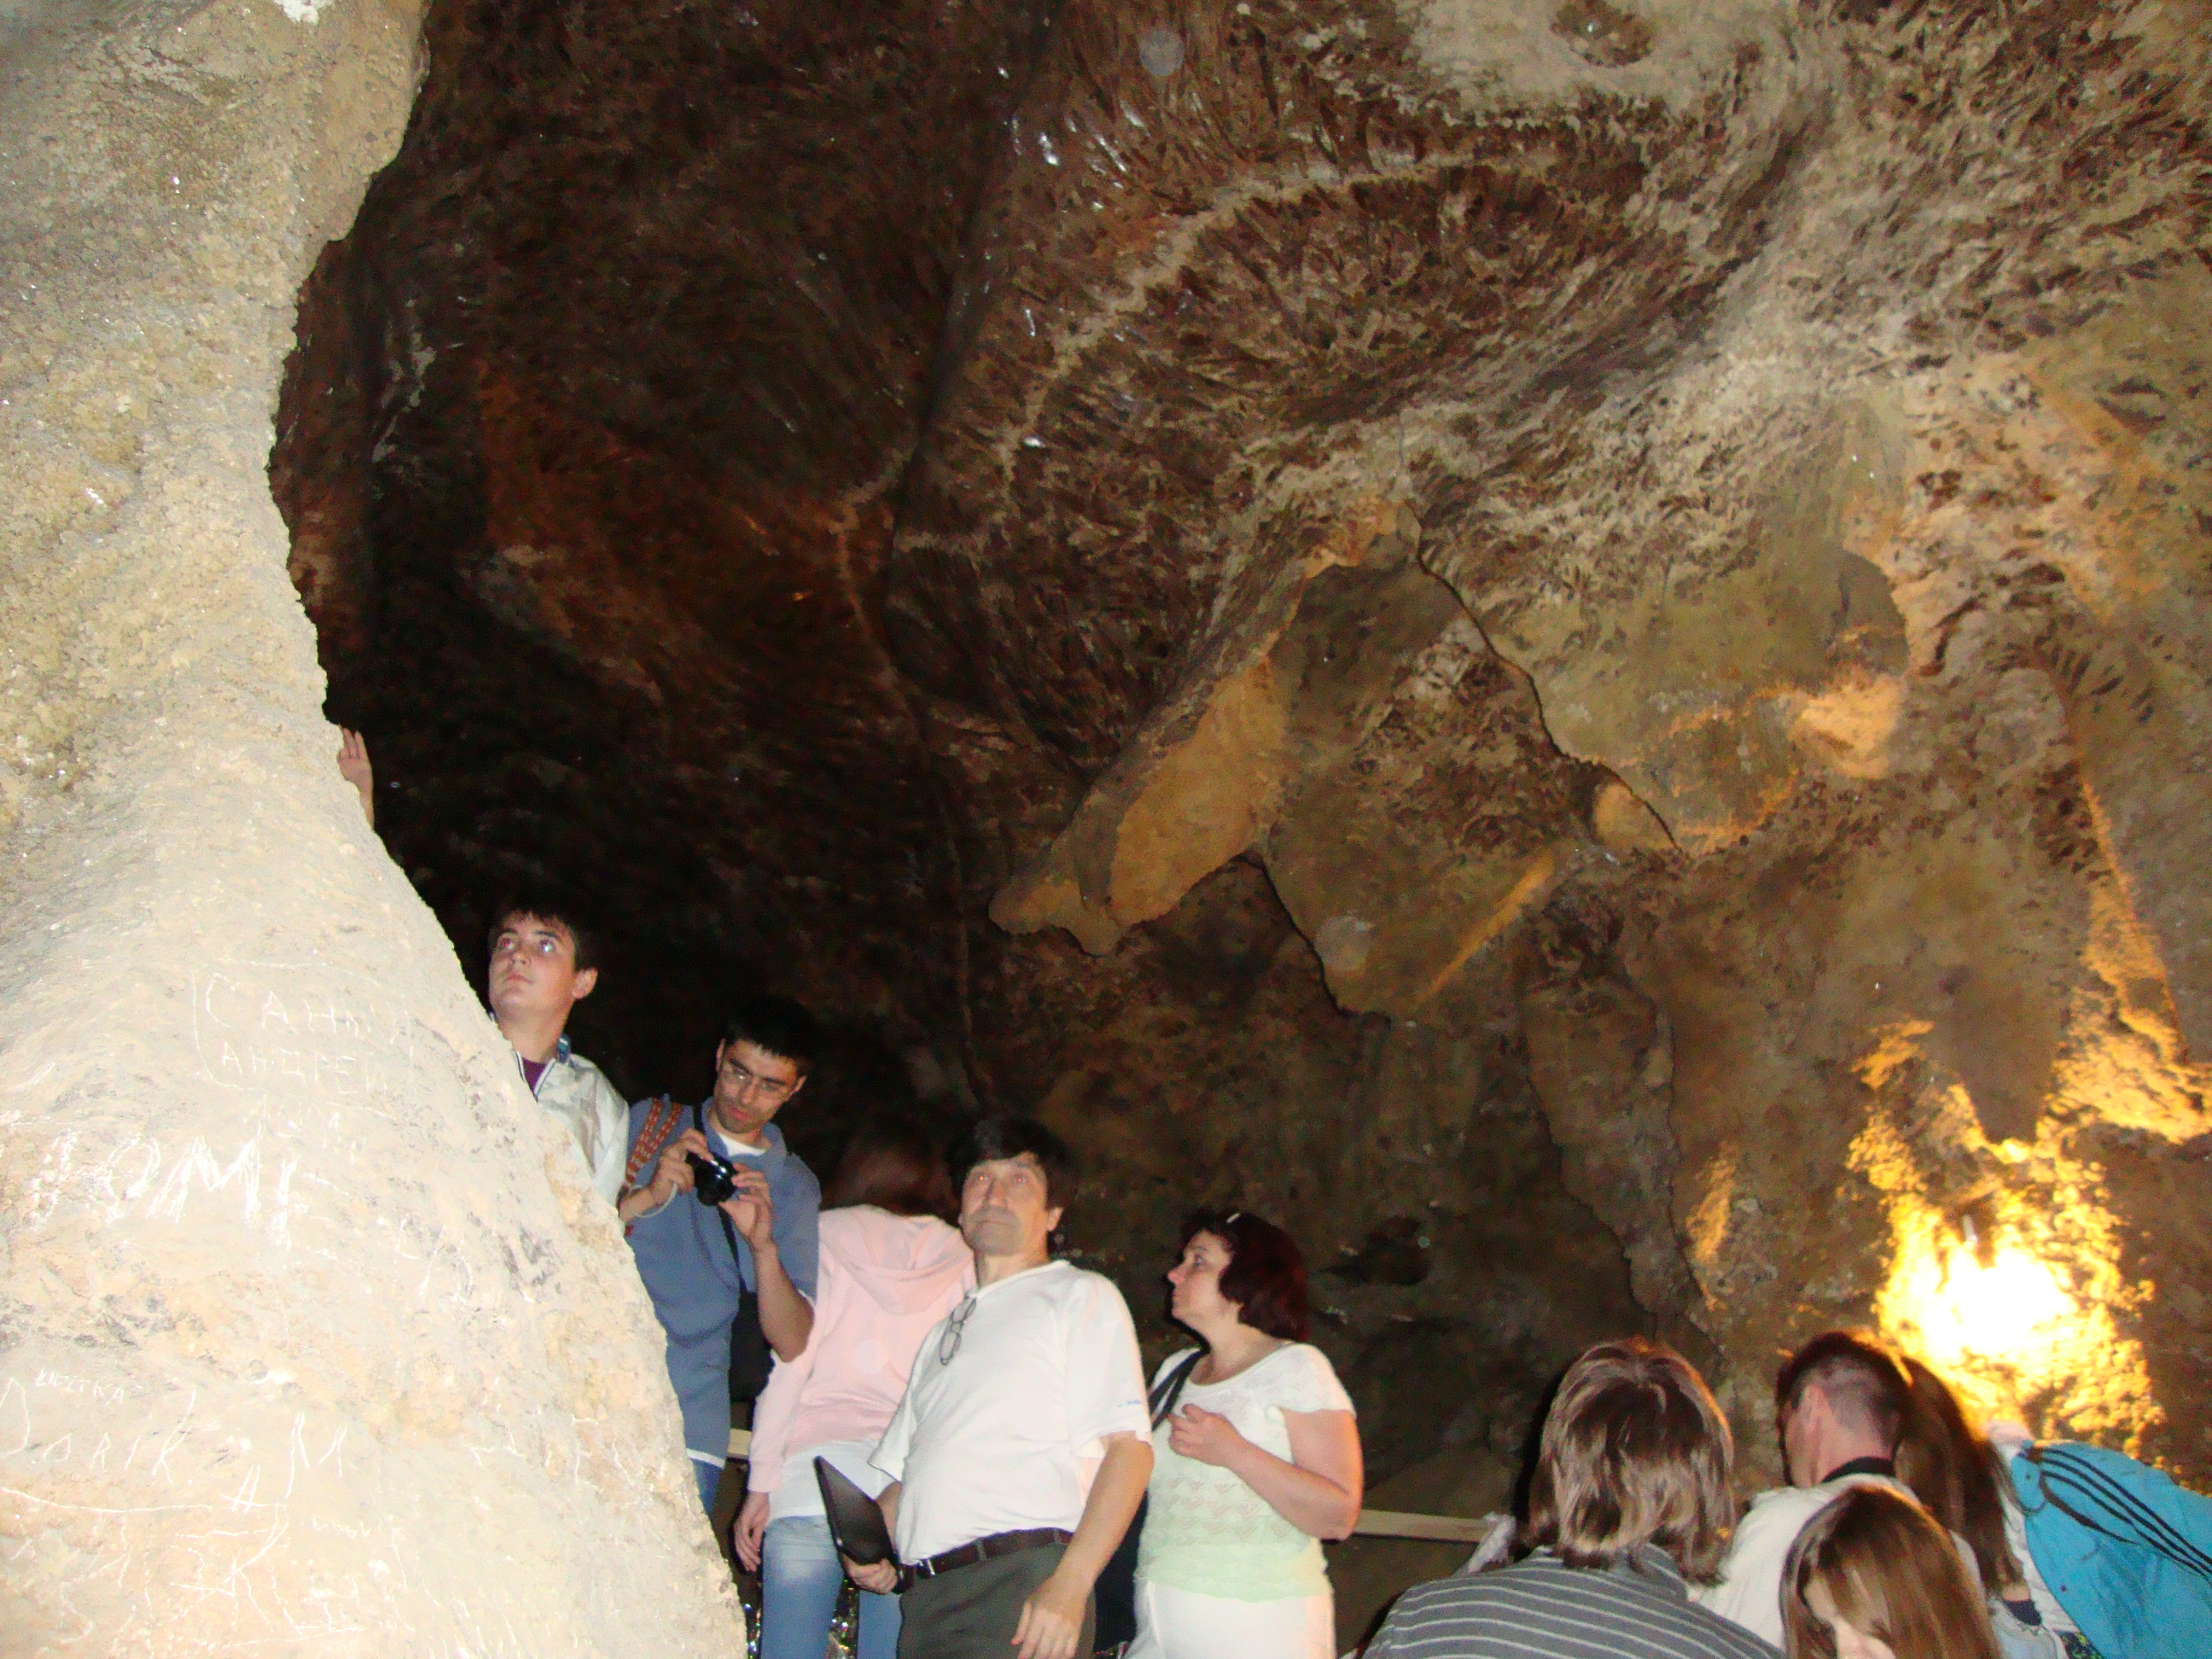 Excursion to the Crystal Cave